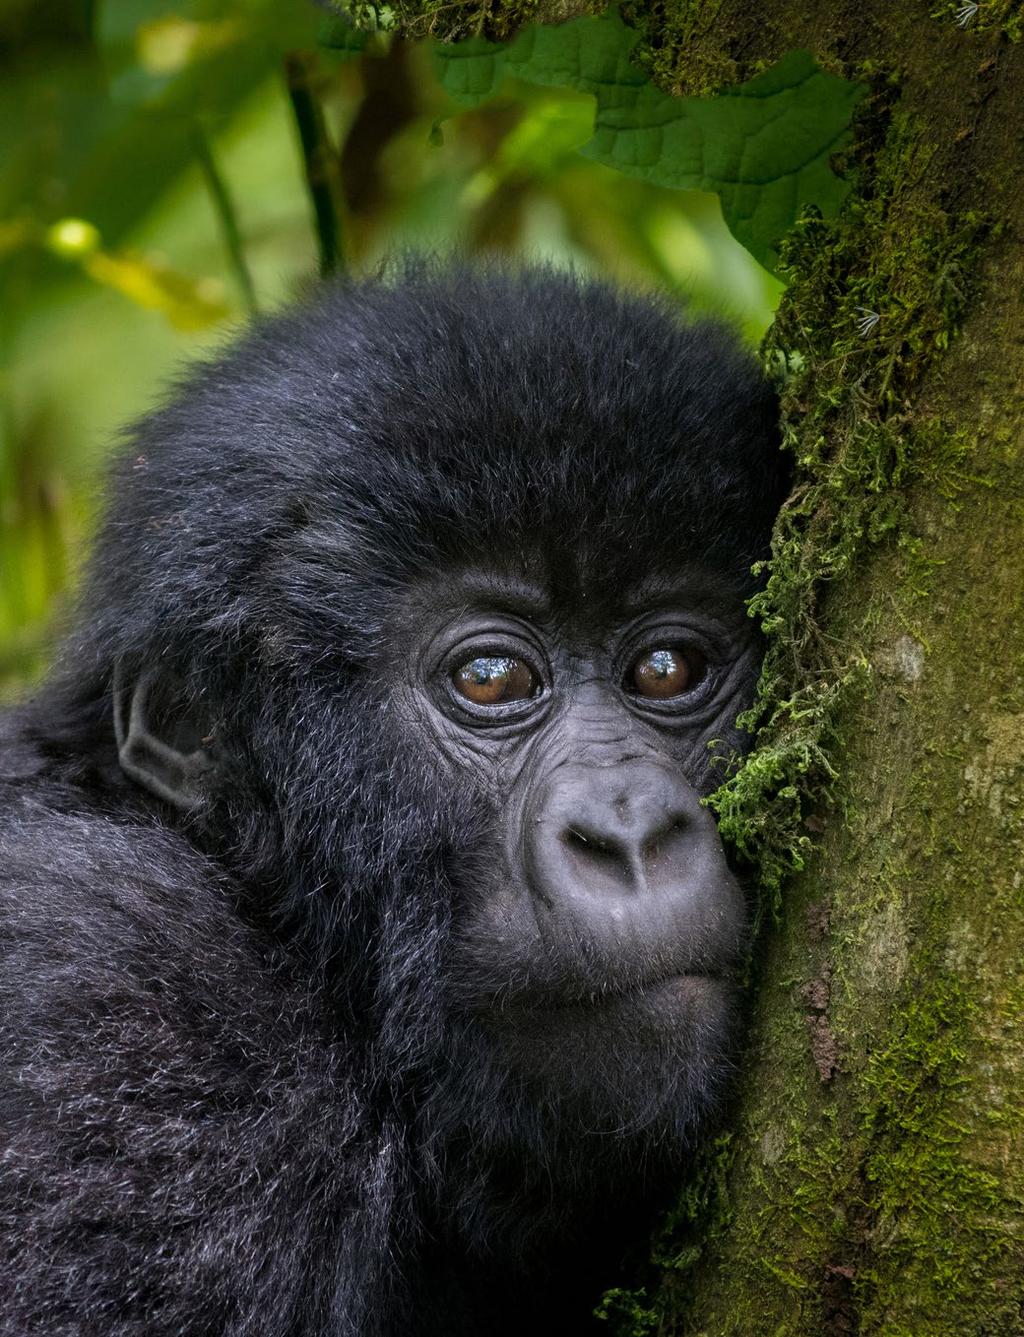 GORILLA TREKS VIEW THE LAST OF THE EARTH S GREAT APES IN THEIR NATIVE ENVIRONMENT ON GORILLA TREKS WITH ULTIMATE